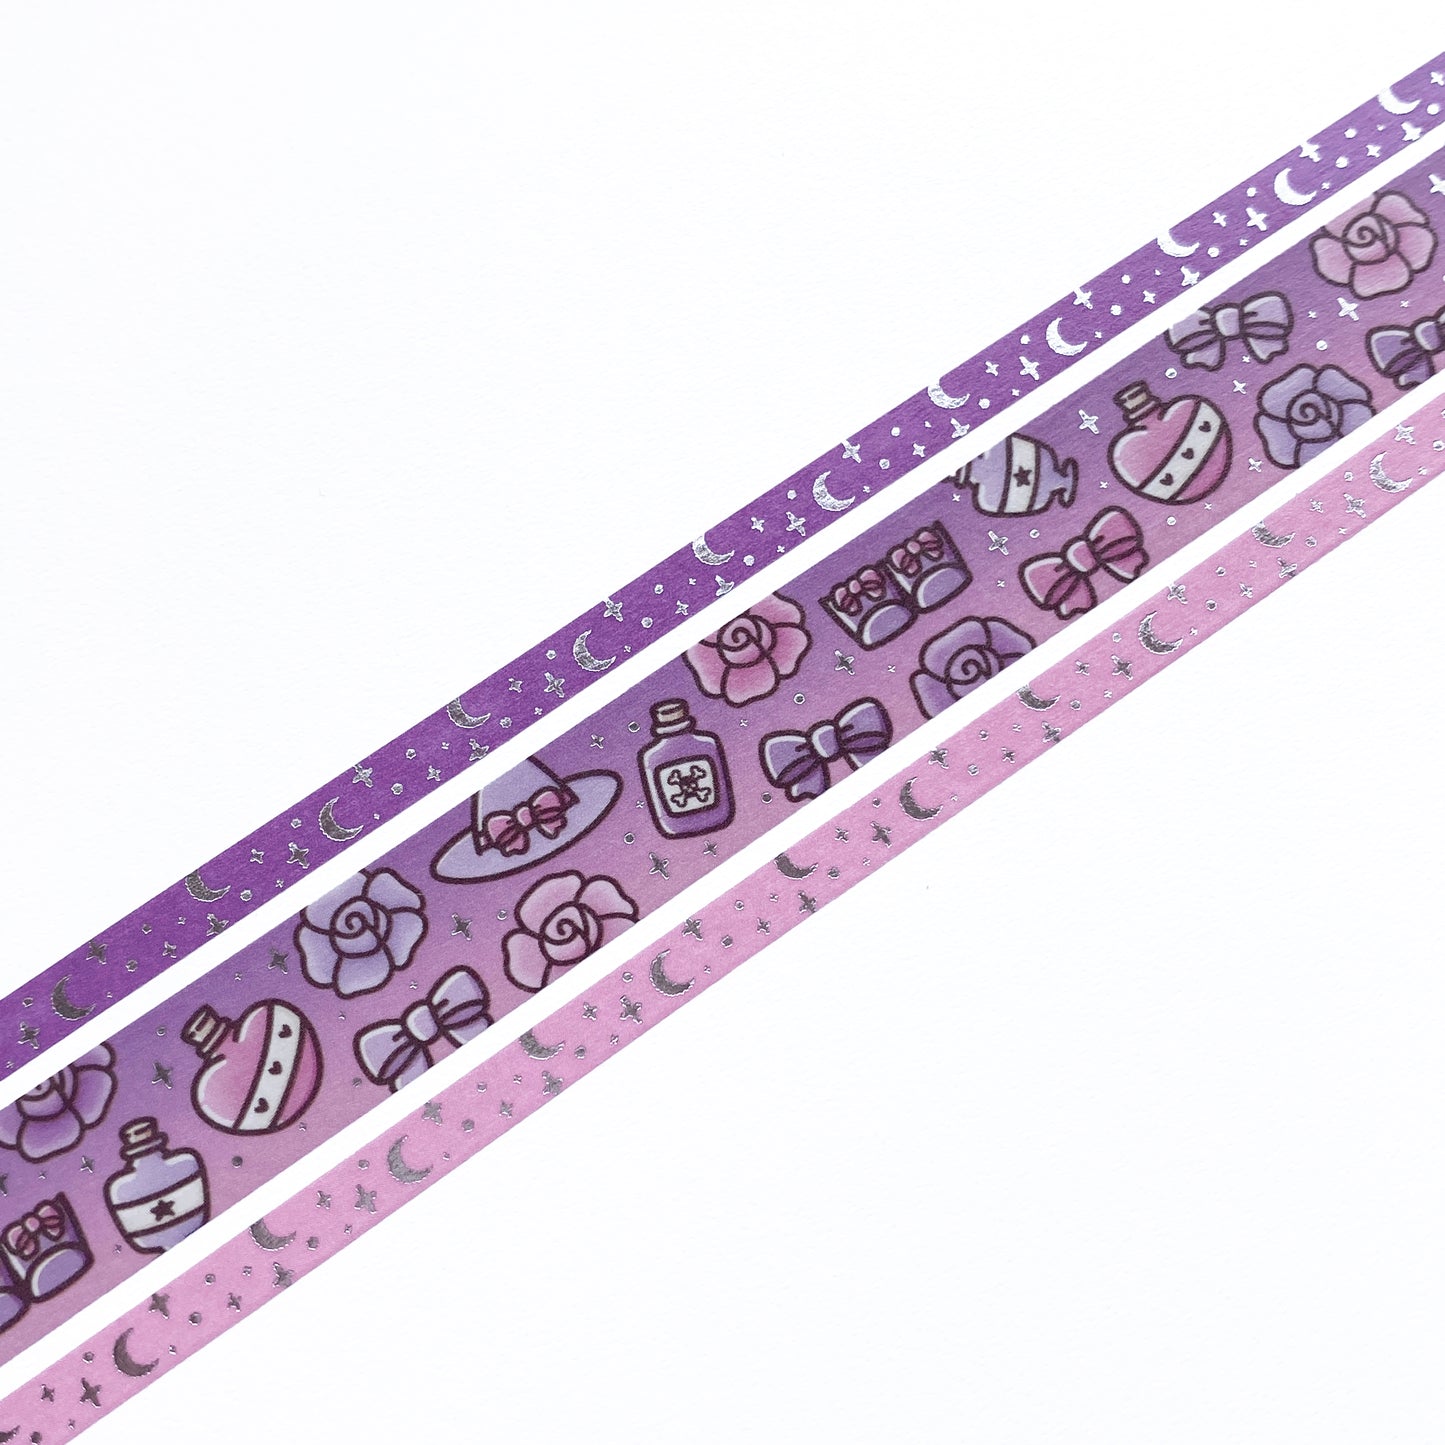 Witchy 01 Washi Tape (Set of 3) - Silver Foil